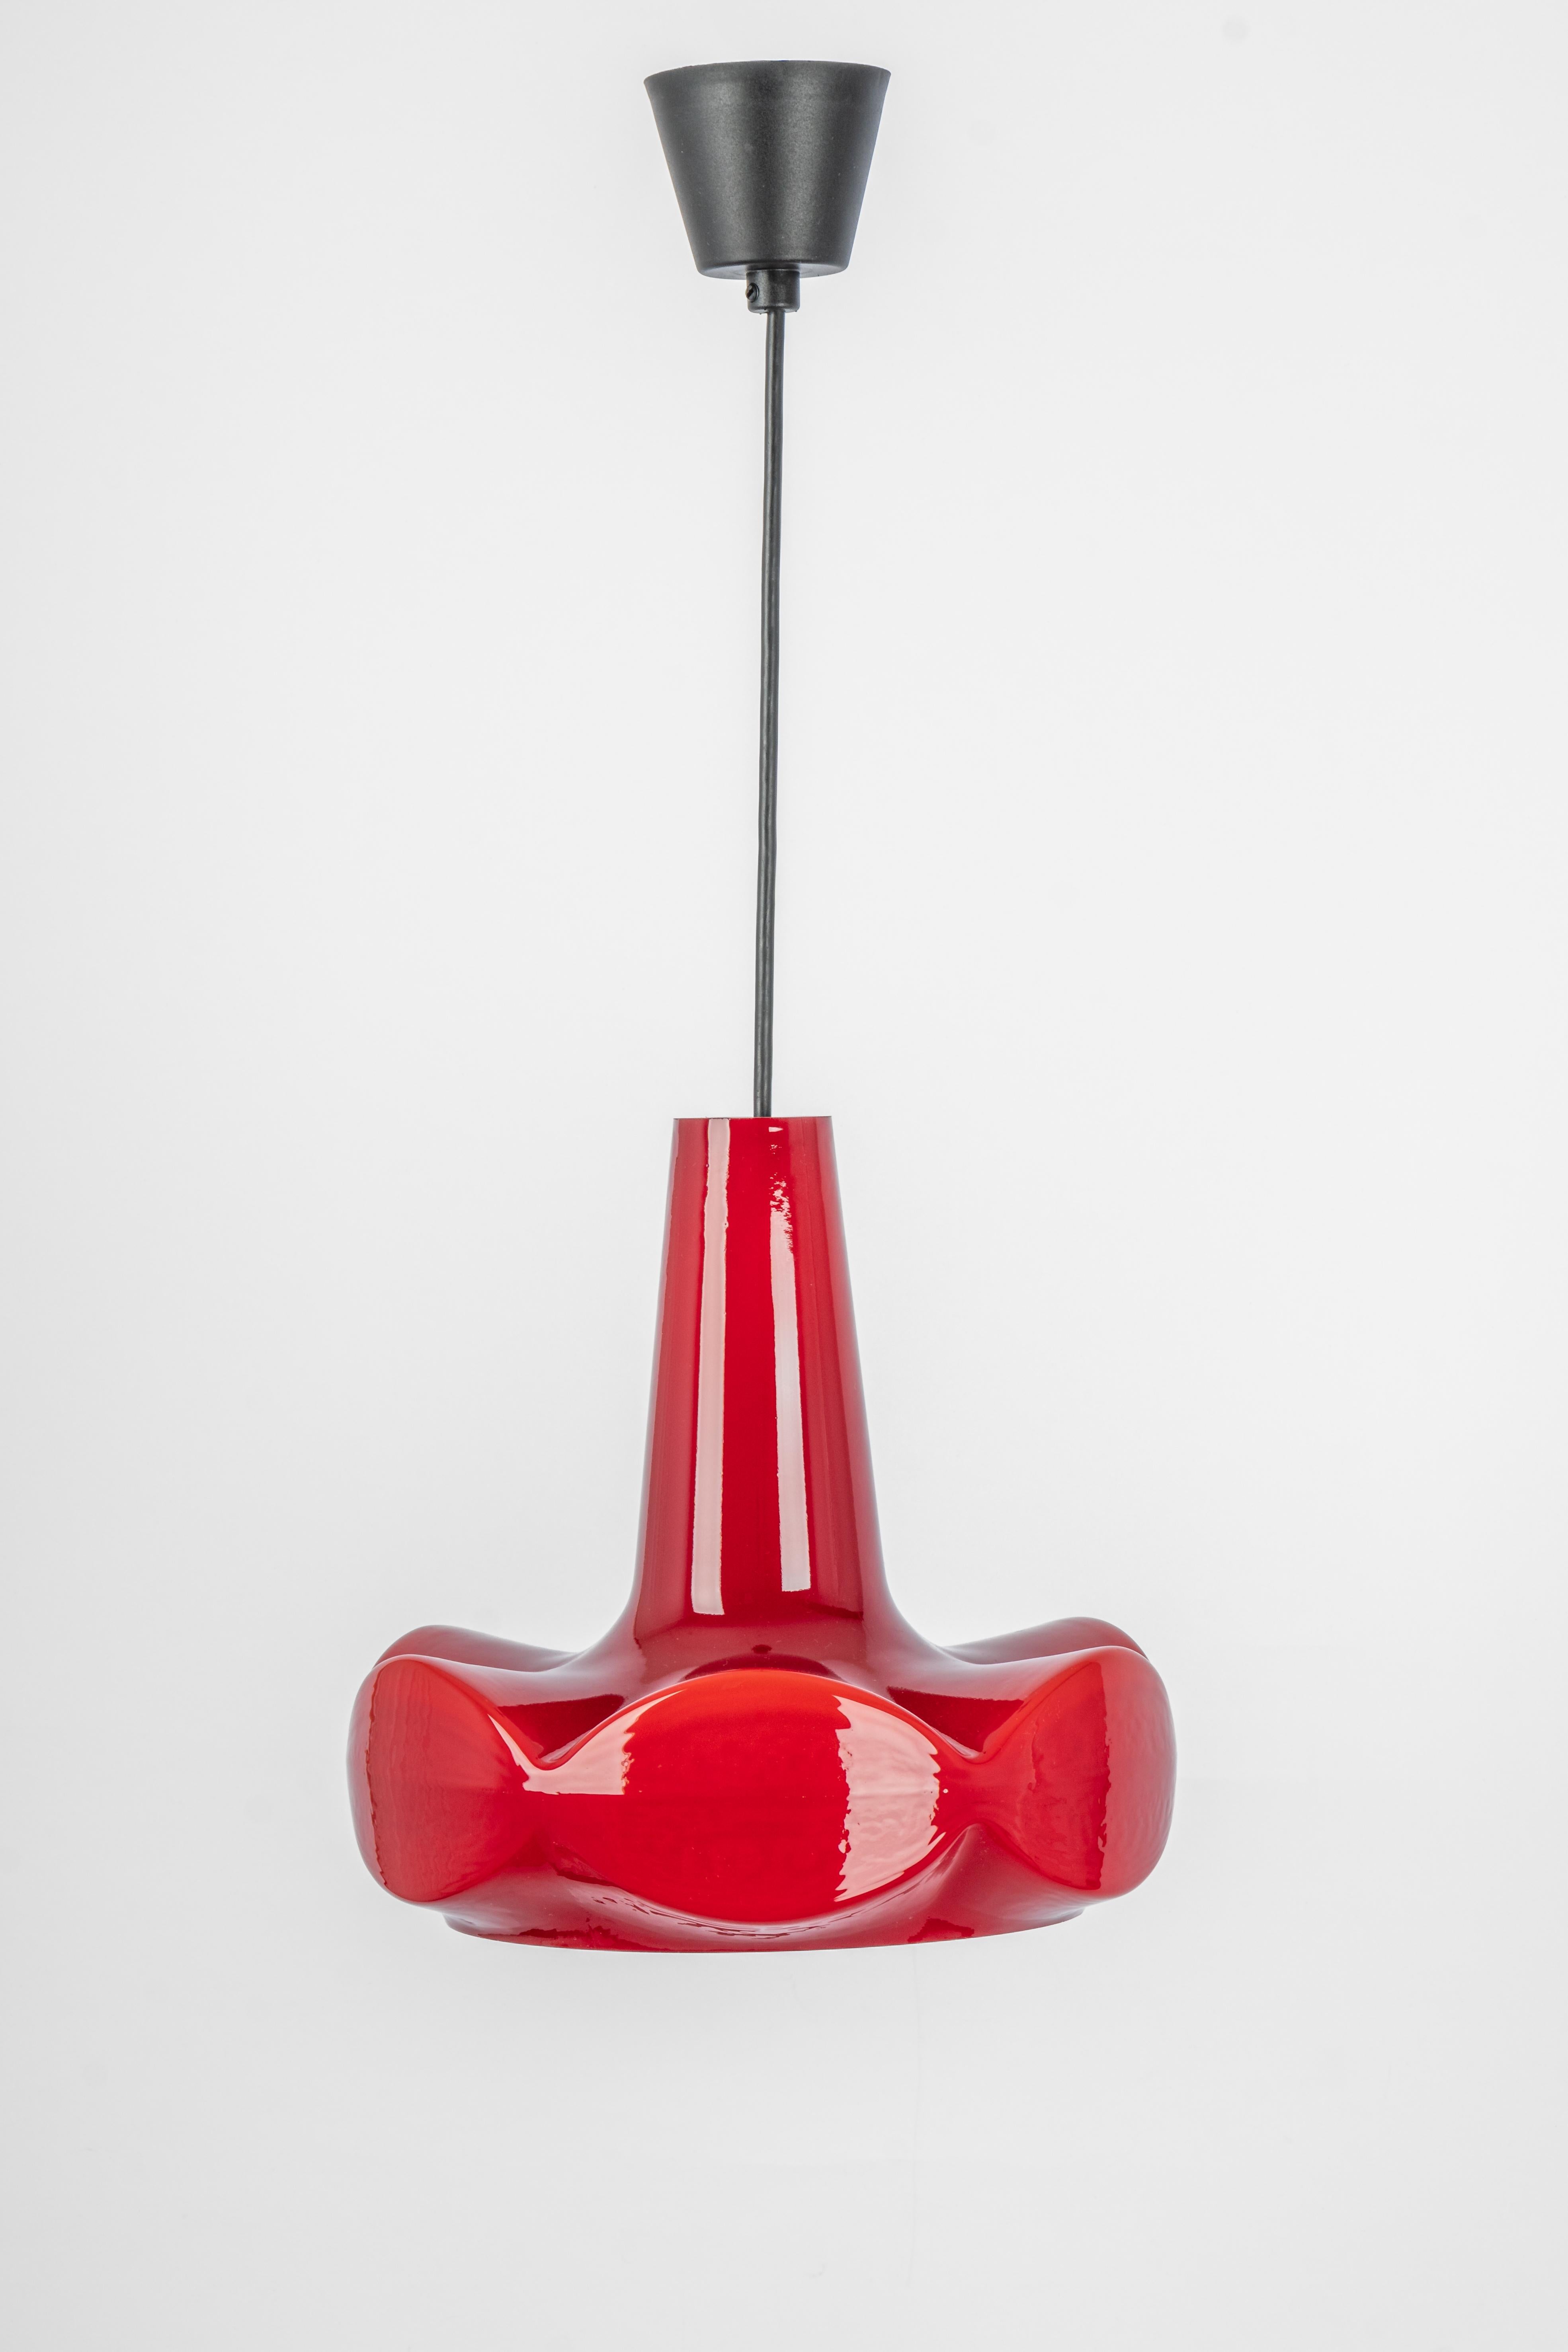 Petite Red glass pendant light by Peill & Putzler, manufactured in Germany, circa the 1970s.

High quality and in very good condition. Cleaned, well-wired, and ready to use. 
The fixture requires 1x E27 Standard bulbs with 100W max
Light bulbs